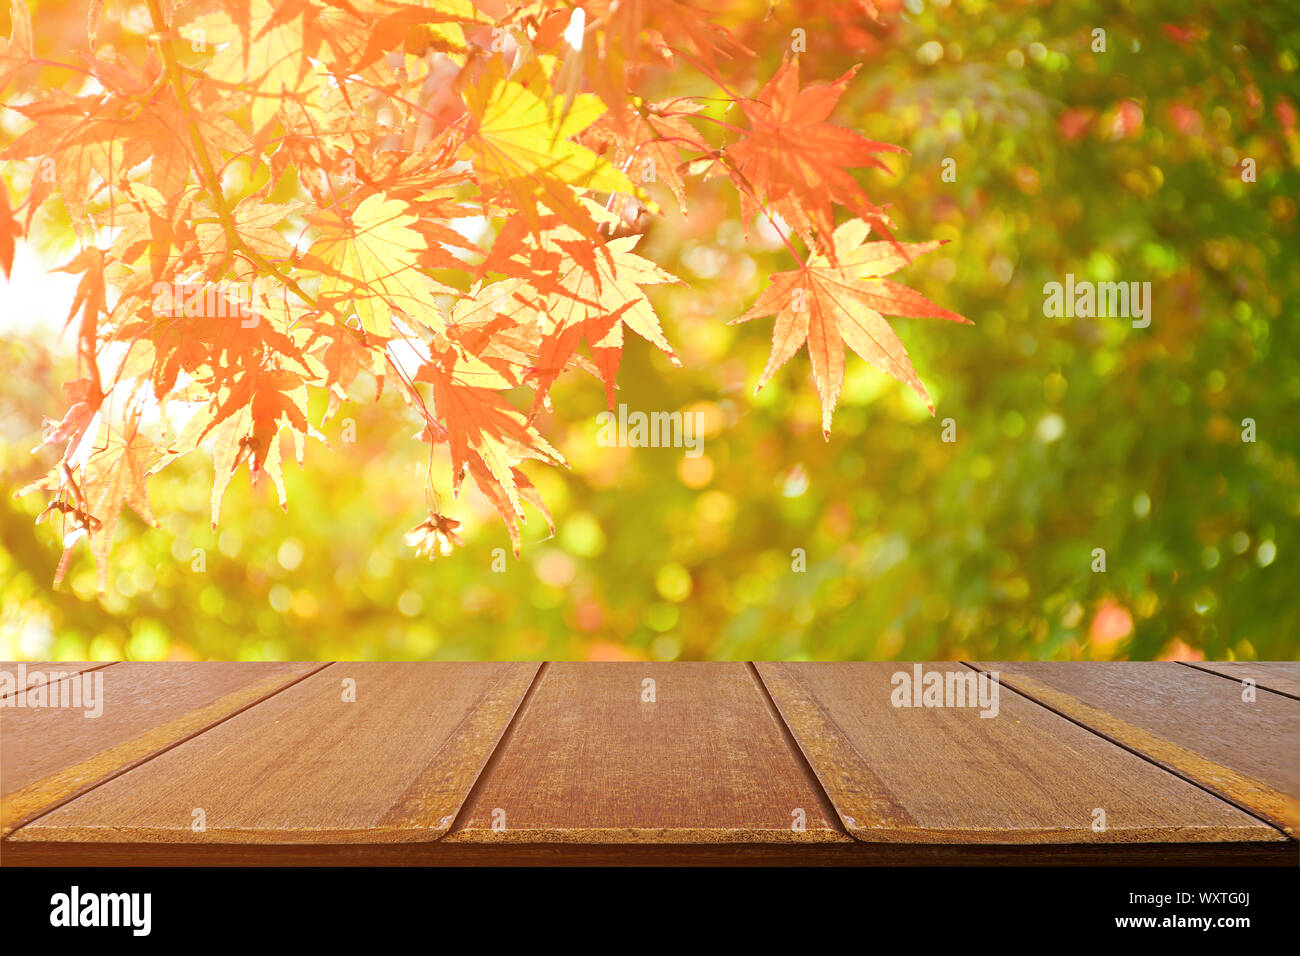 Perspective wood counter with Japanese maple tree garden in autumn. Wood shelf for product display. Stock Photo